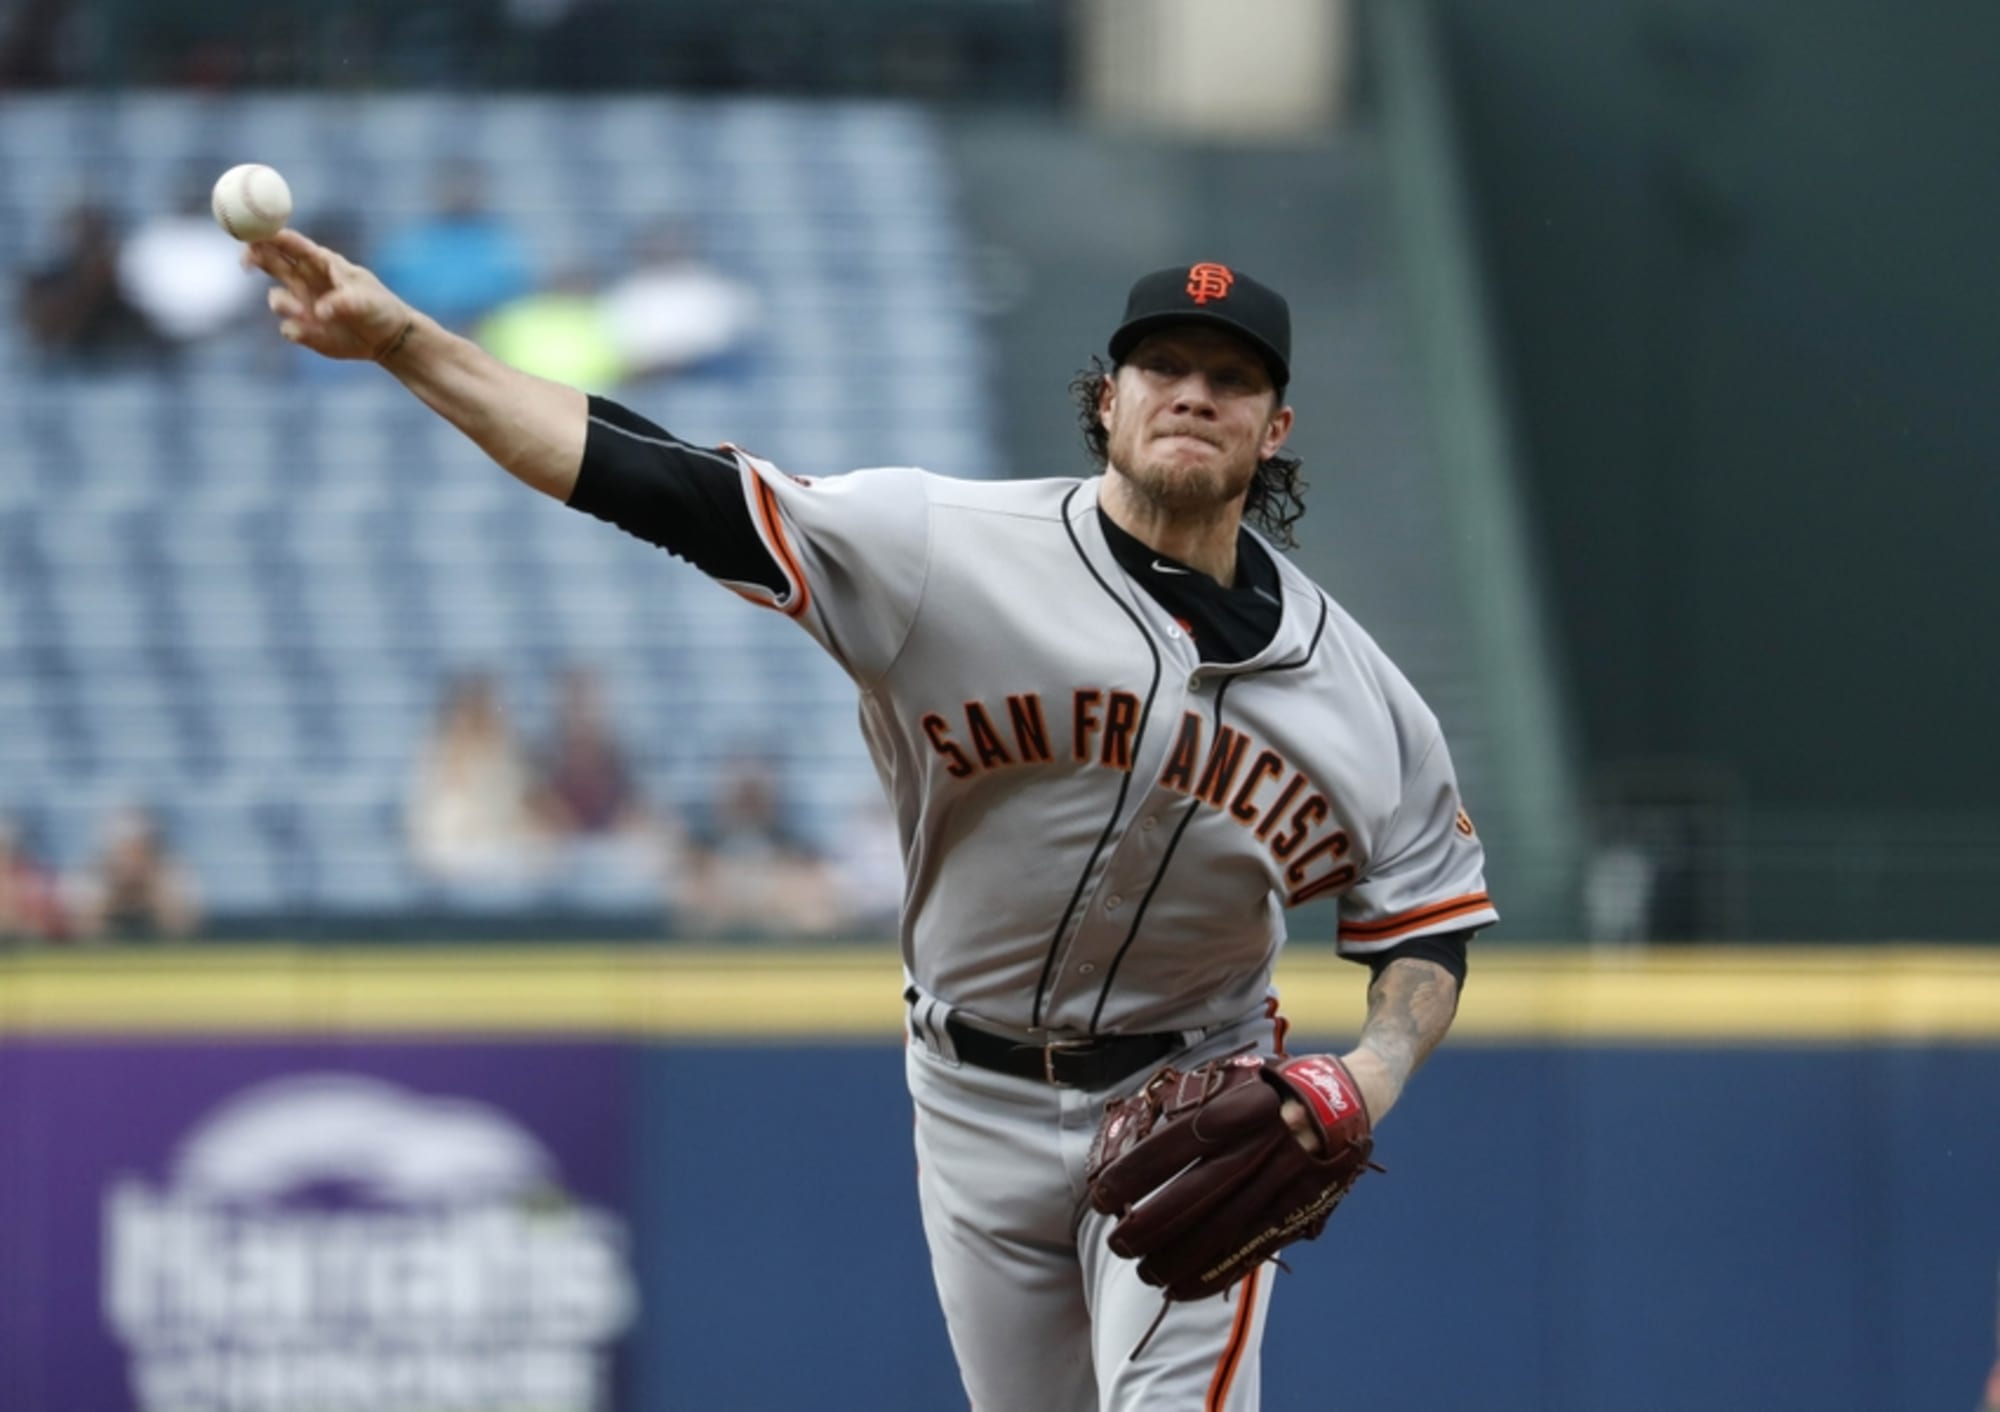 Spend the day with National League Cy Young winner Jake Peavy 